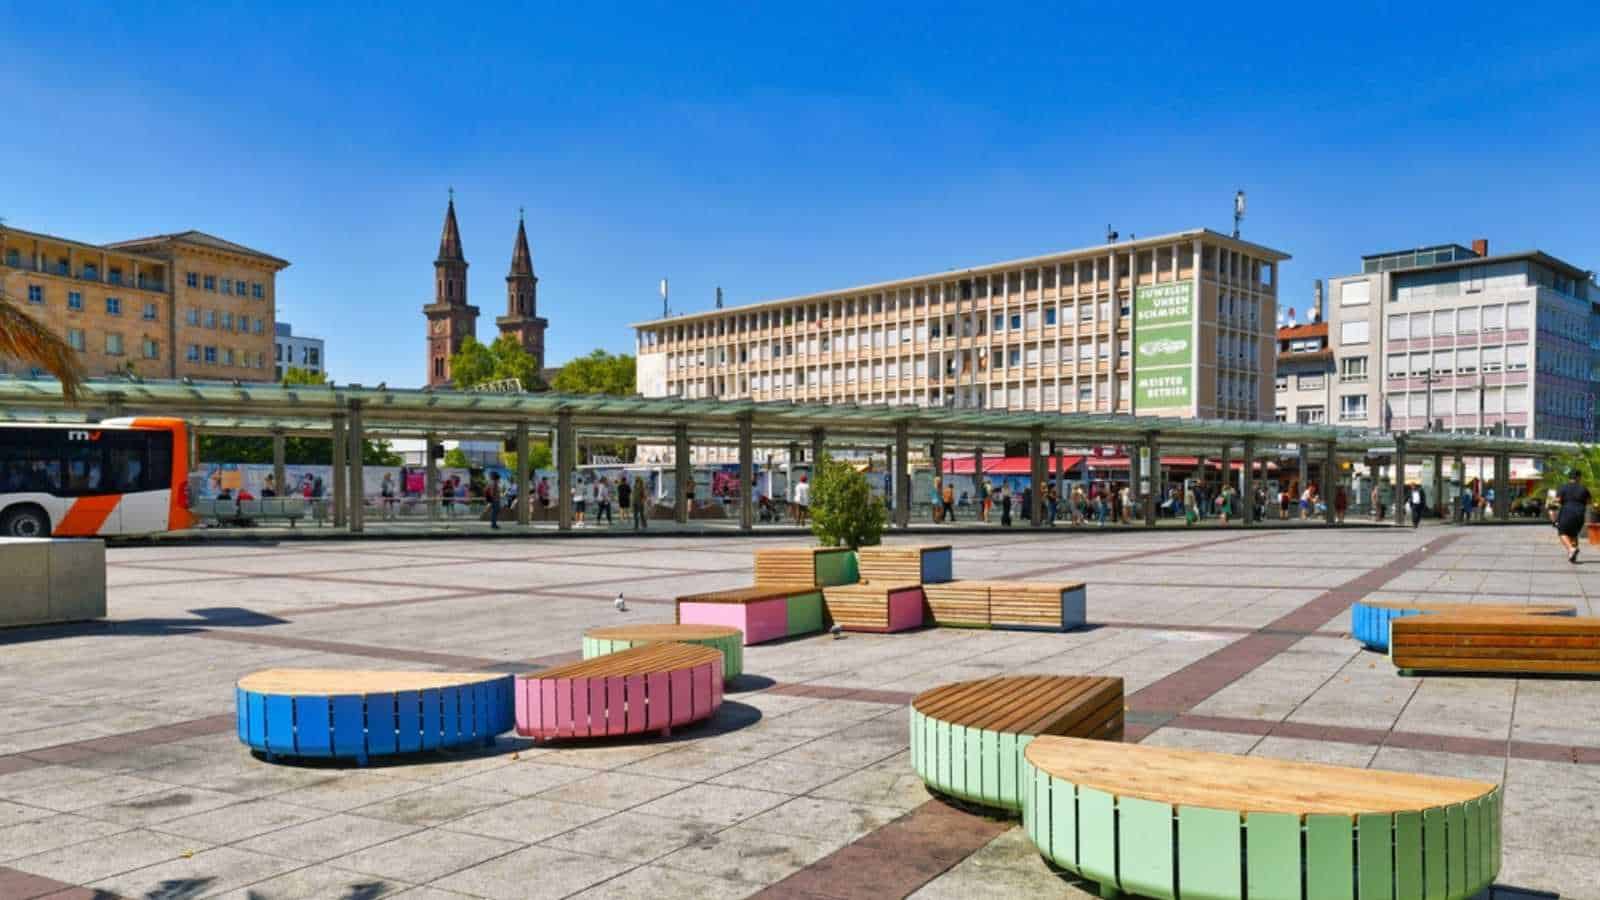 Ludwigshafen, Germany - August 2022: Town square called 'Berliner Platz' with public transportation bus and tram station